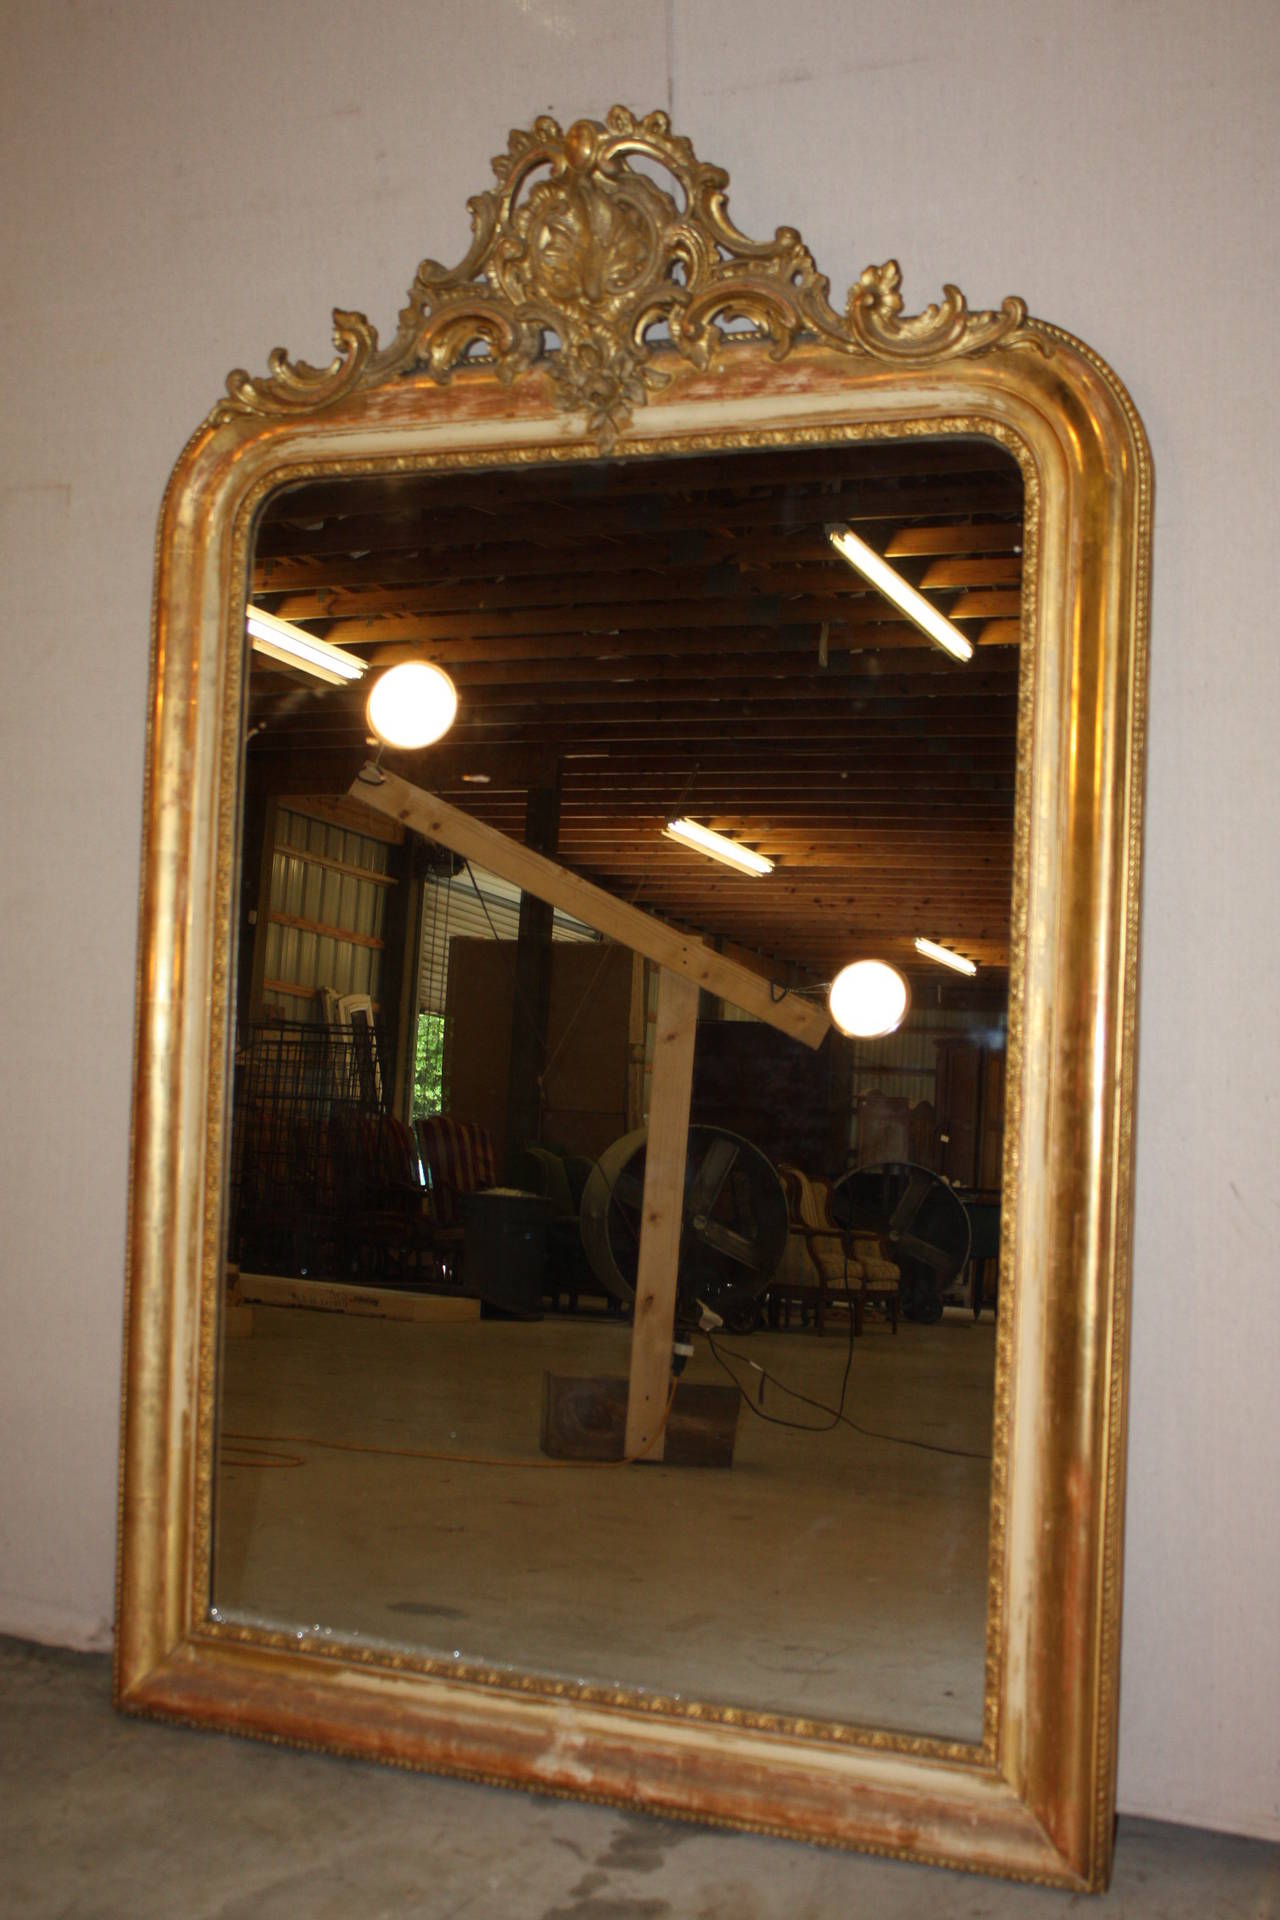 This is a very nice French gilded mirror with a Cartouche.  The glass is original to the mirror and shows some age but not to the point that the reflection is diminished.